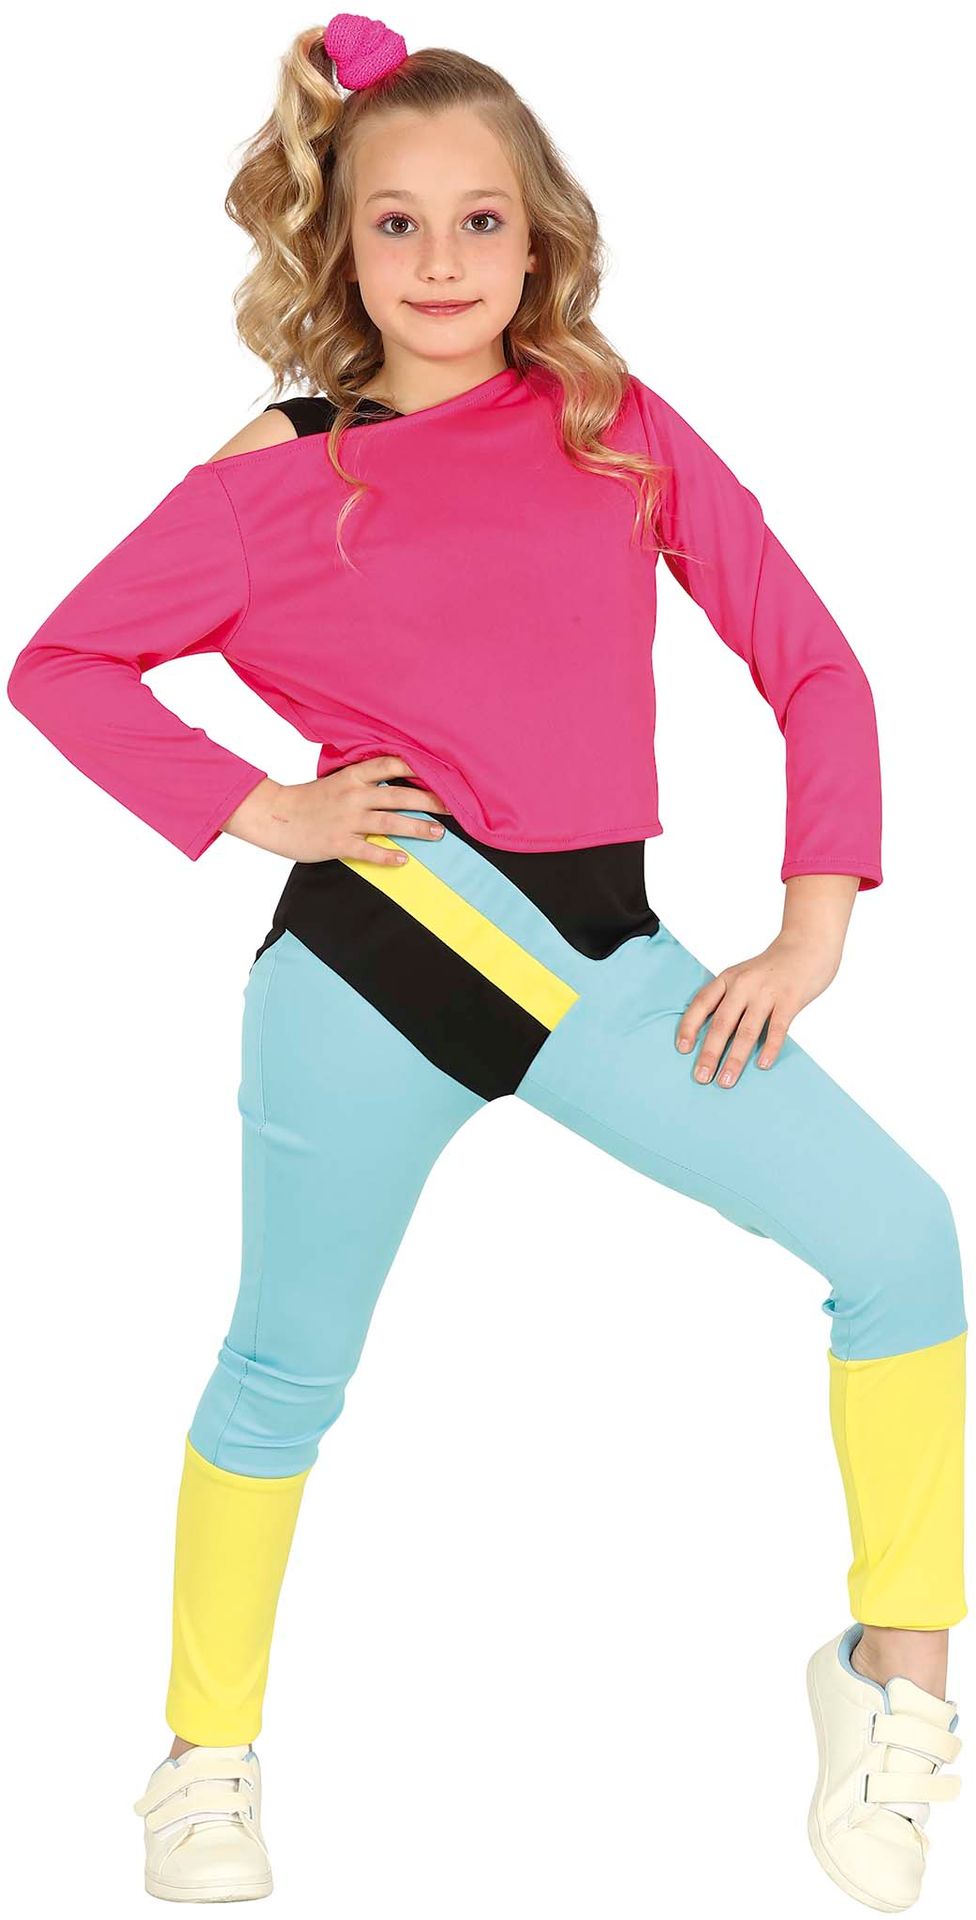 Retro foute fitness outfit meisjes